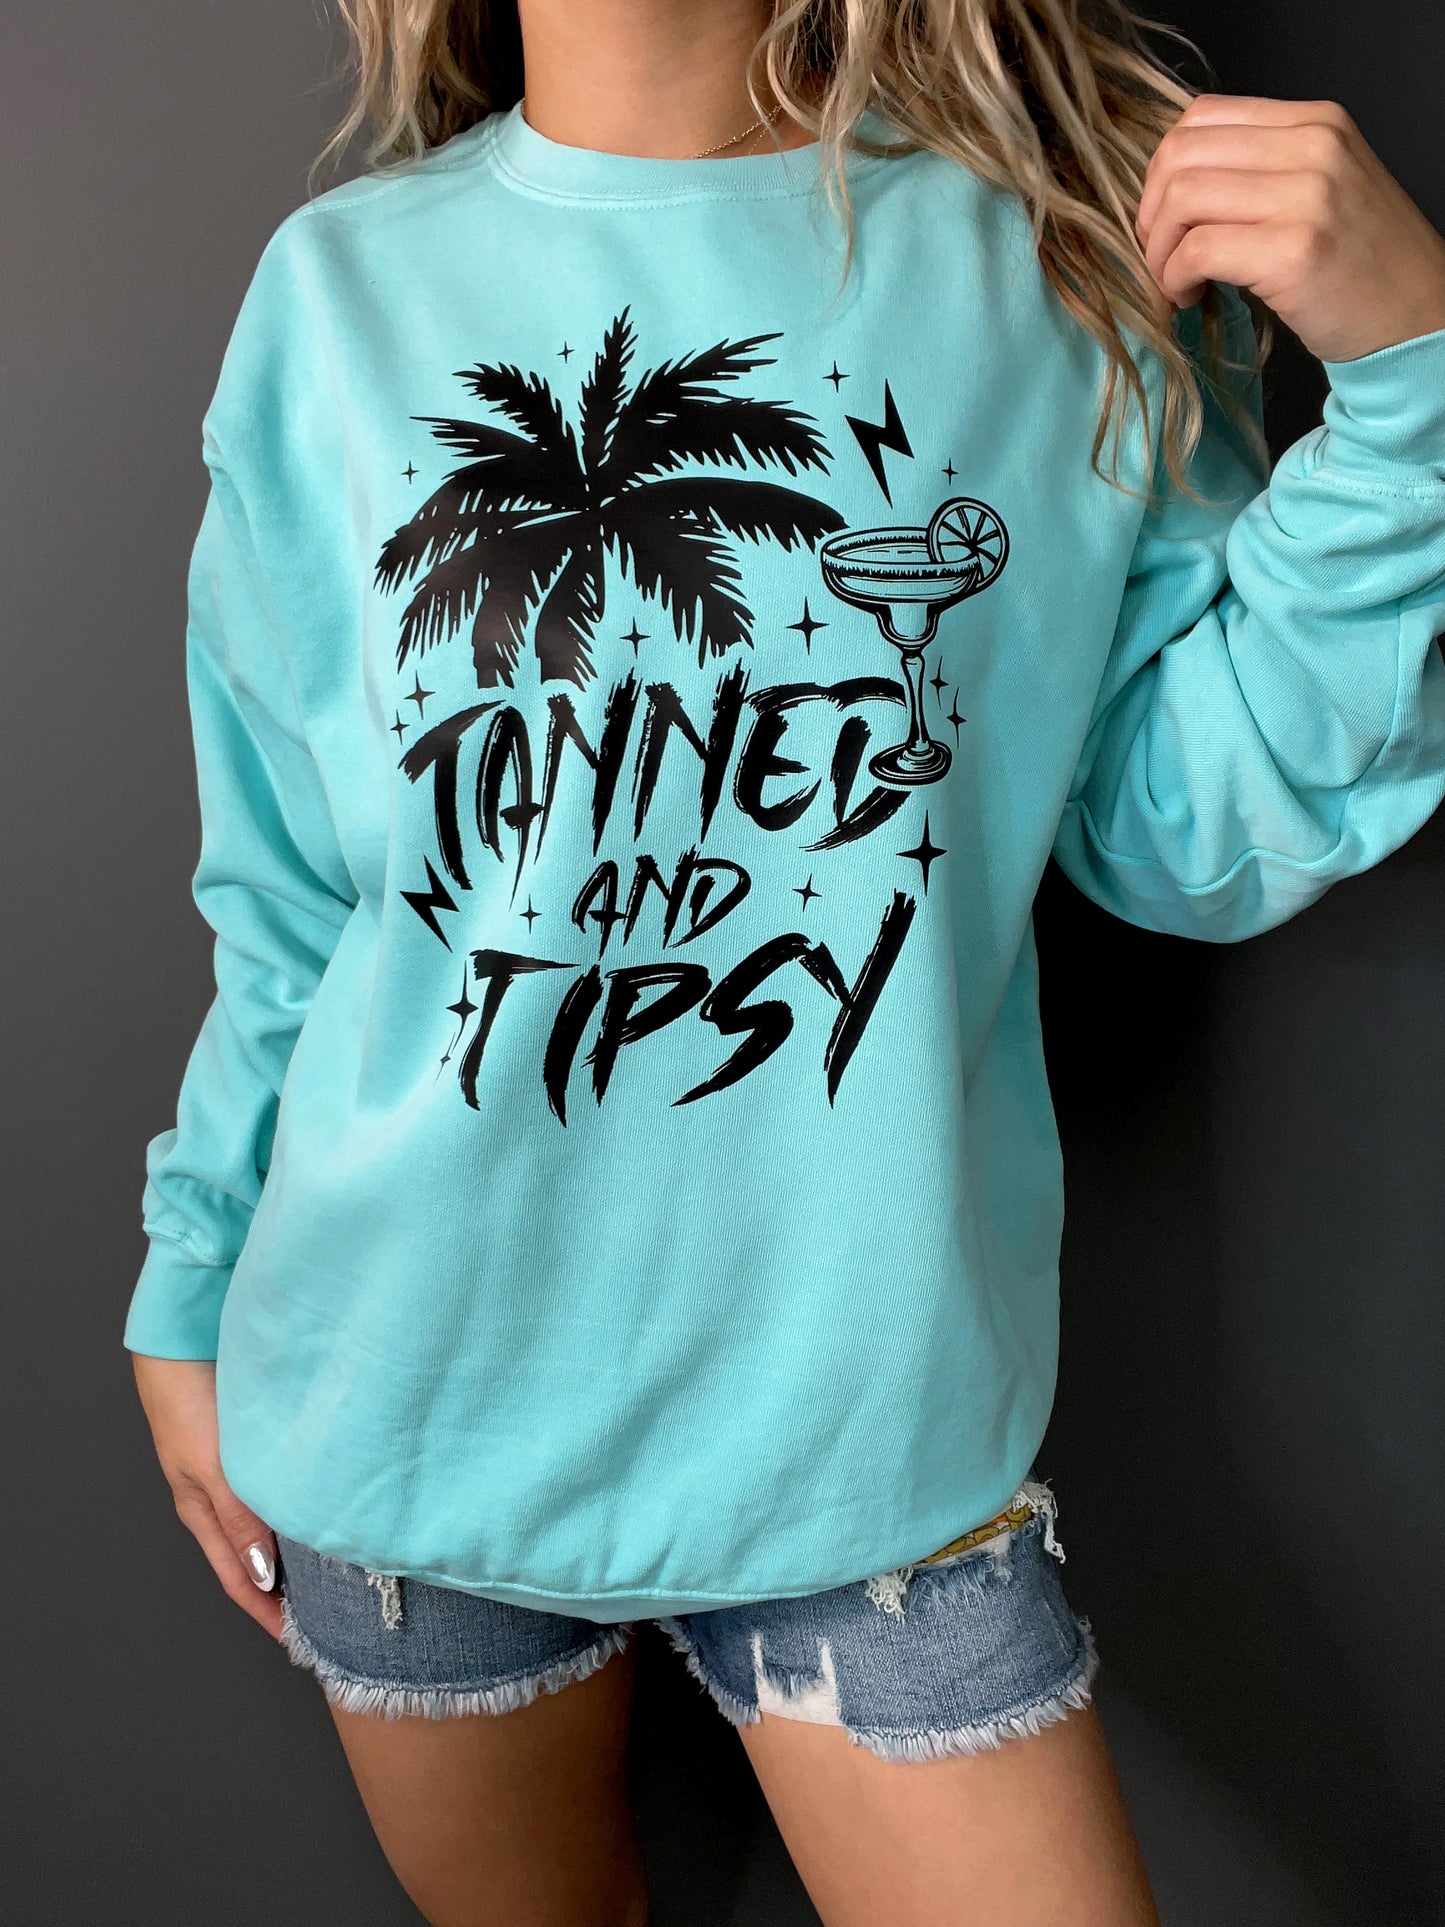 Tanned & Tipsy Graphic Crewneck